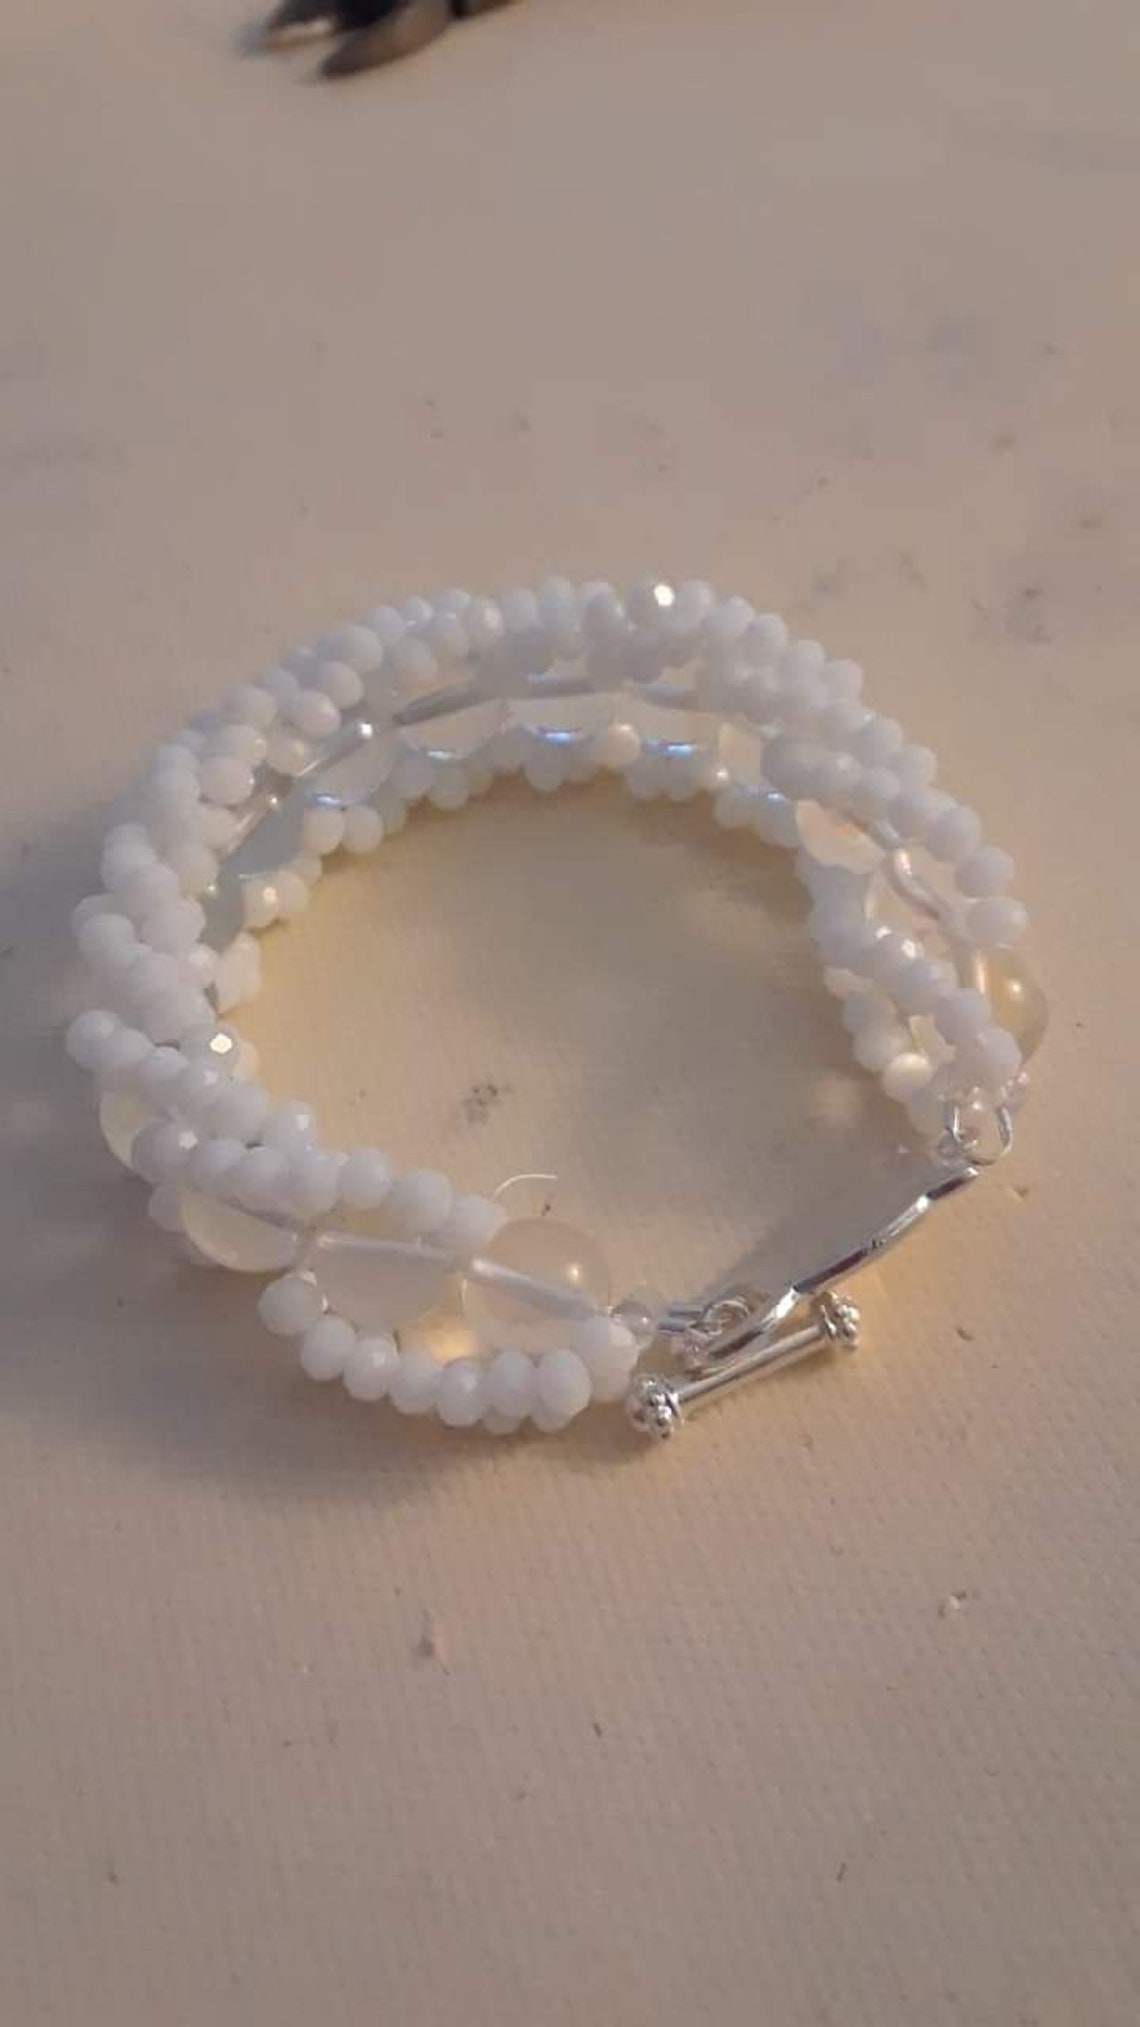 4mm Faceted Opaque White Crystal and Round Glass Bracelet with | Etsy